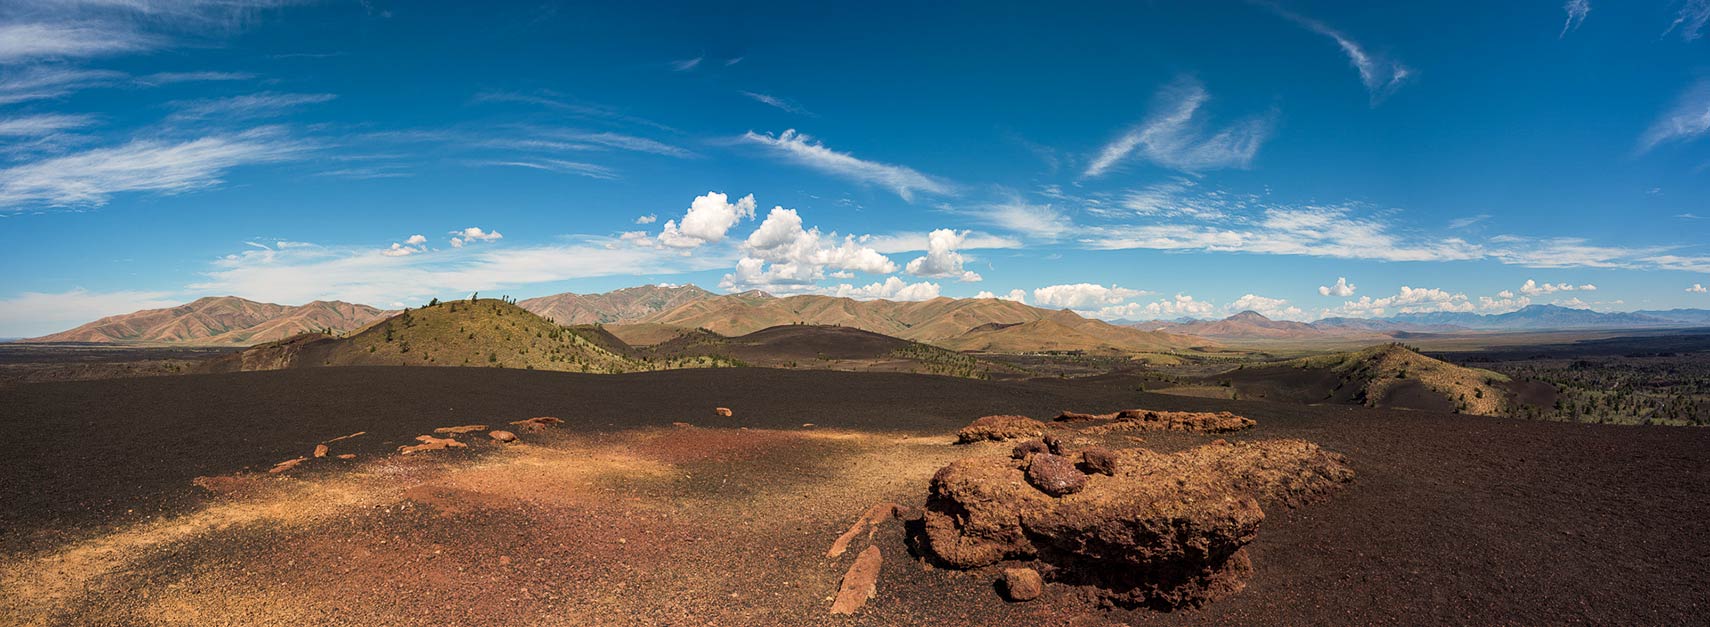 Landscape Craters of the Moon National Monument, Idaho